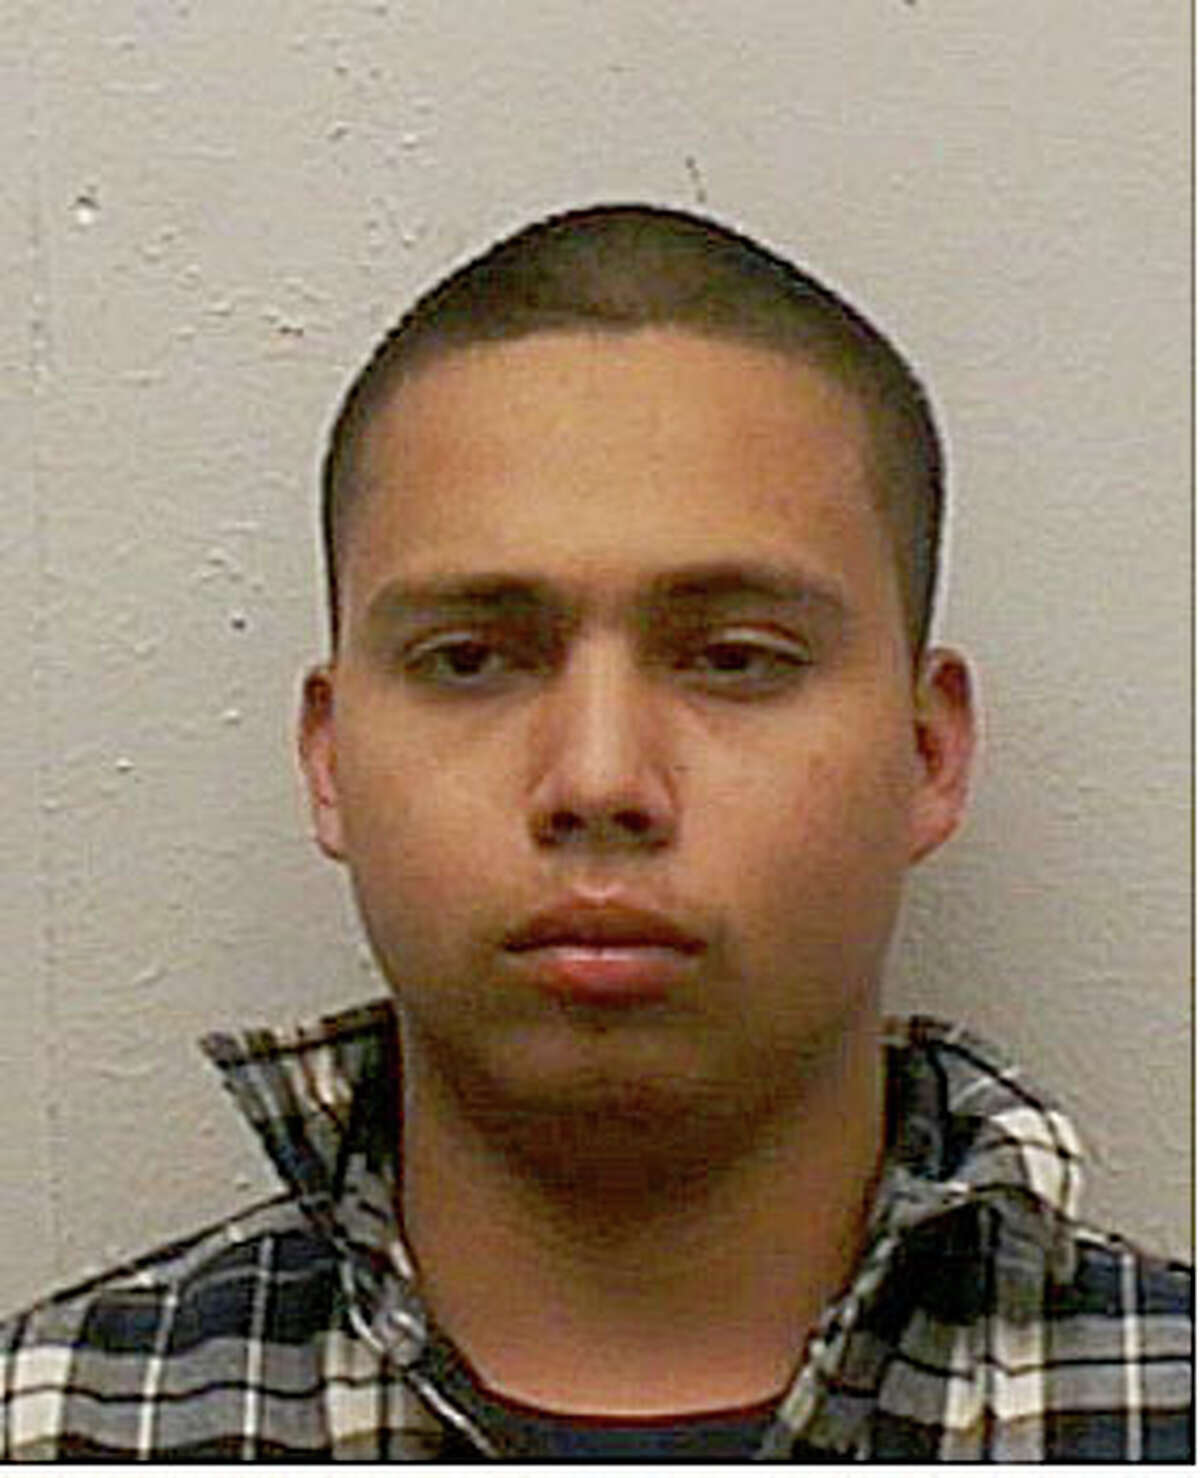 Efrain Lopez was booked on a capital murder charge on Dec. 17, 2005. He has been in jail for 7 years, 8 months. Charges were filed against Lopez, Juan Balderas and Israel Diaz in the shooting death of a man in the 1300 block of Bunker Hill about 9 p.m. in Dec. 2005.